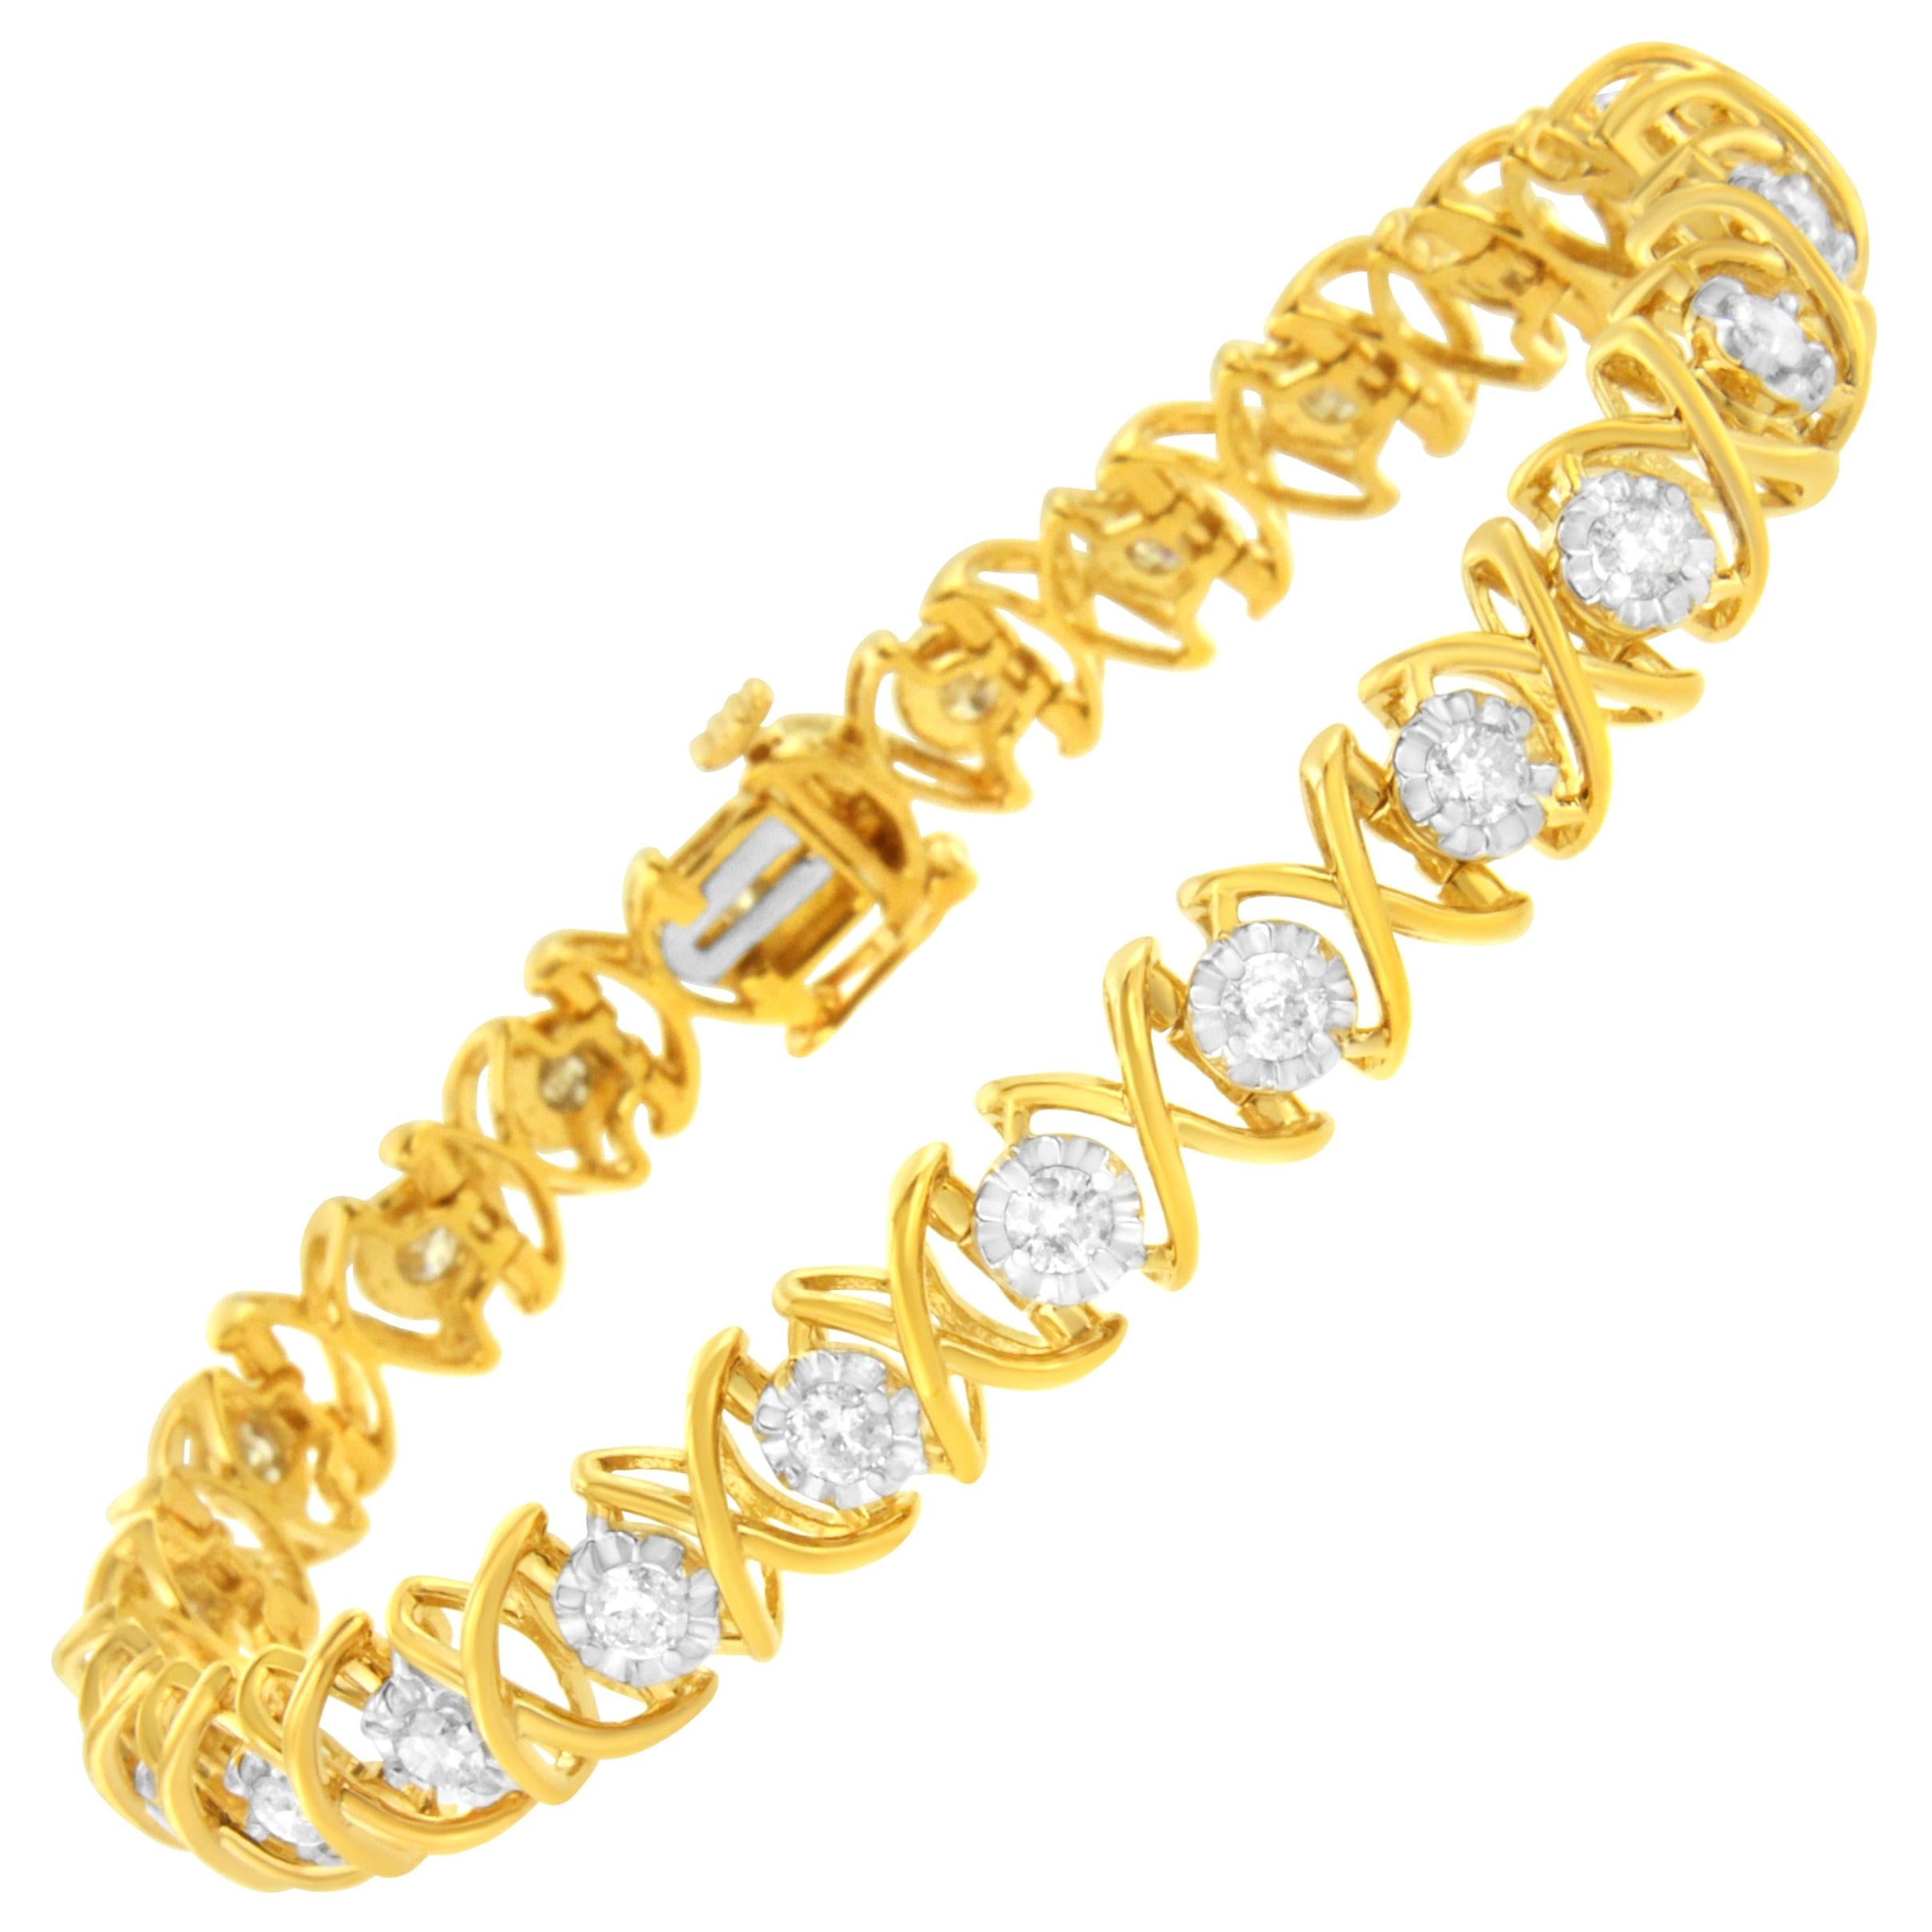 10K Yellow Gold Plated Sterling Silver 2.00 Carat Diamond "XOXO" Link Bracelet For Sale